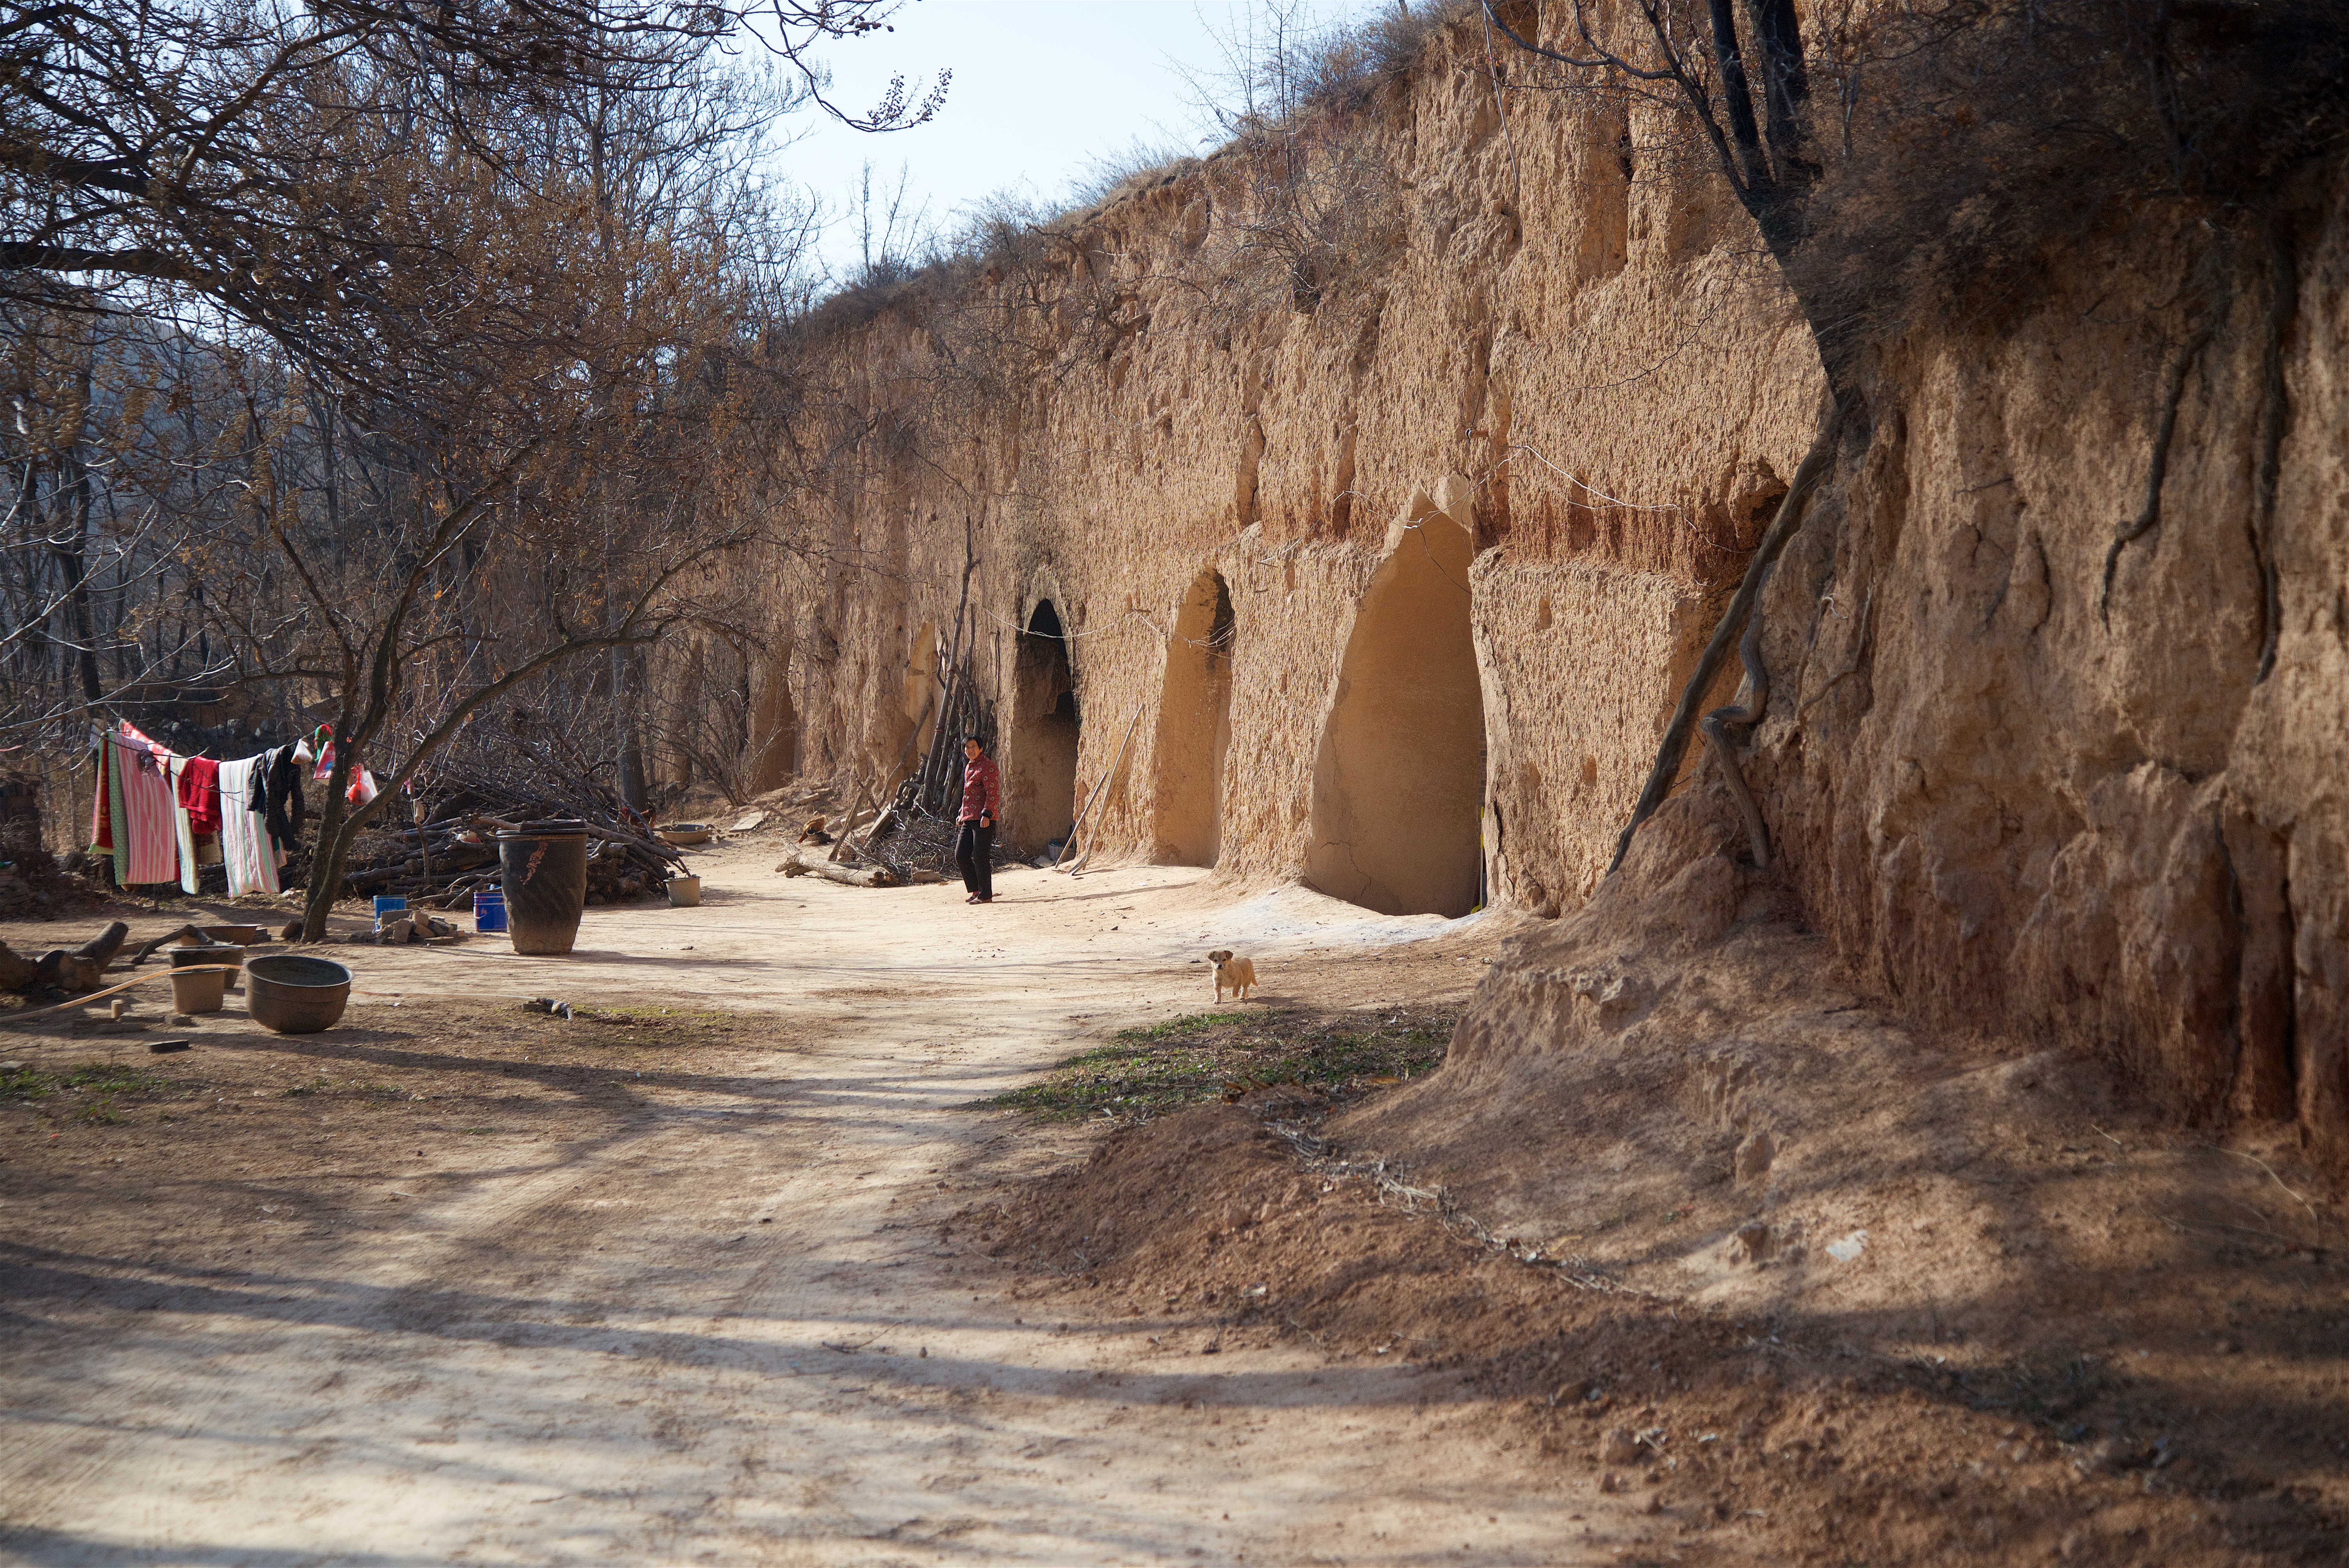 A view of several cave homes in Ruicheng, an agricultural region about 450 miles from Beijing, China.